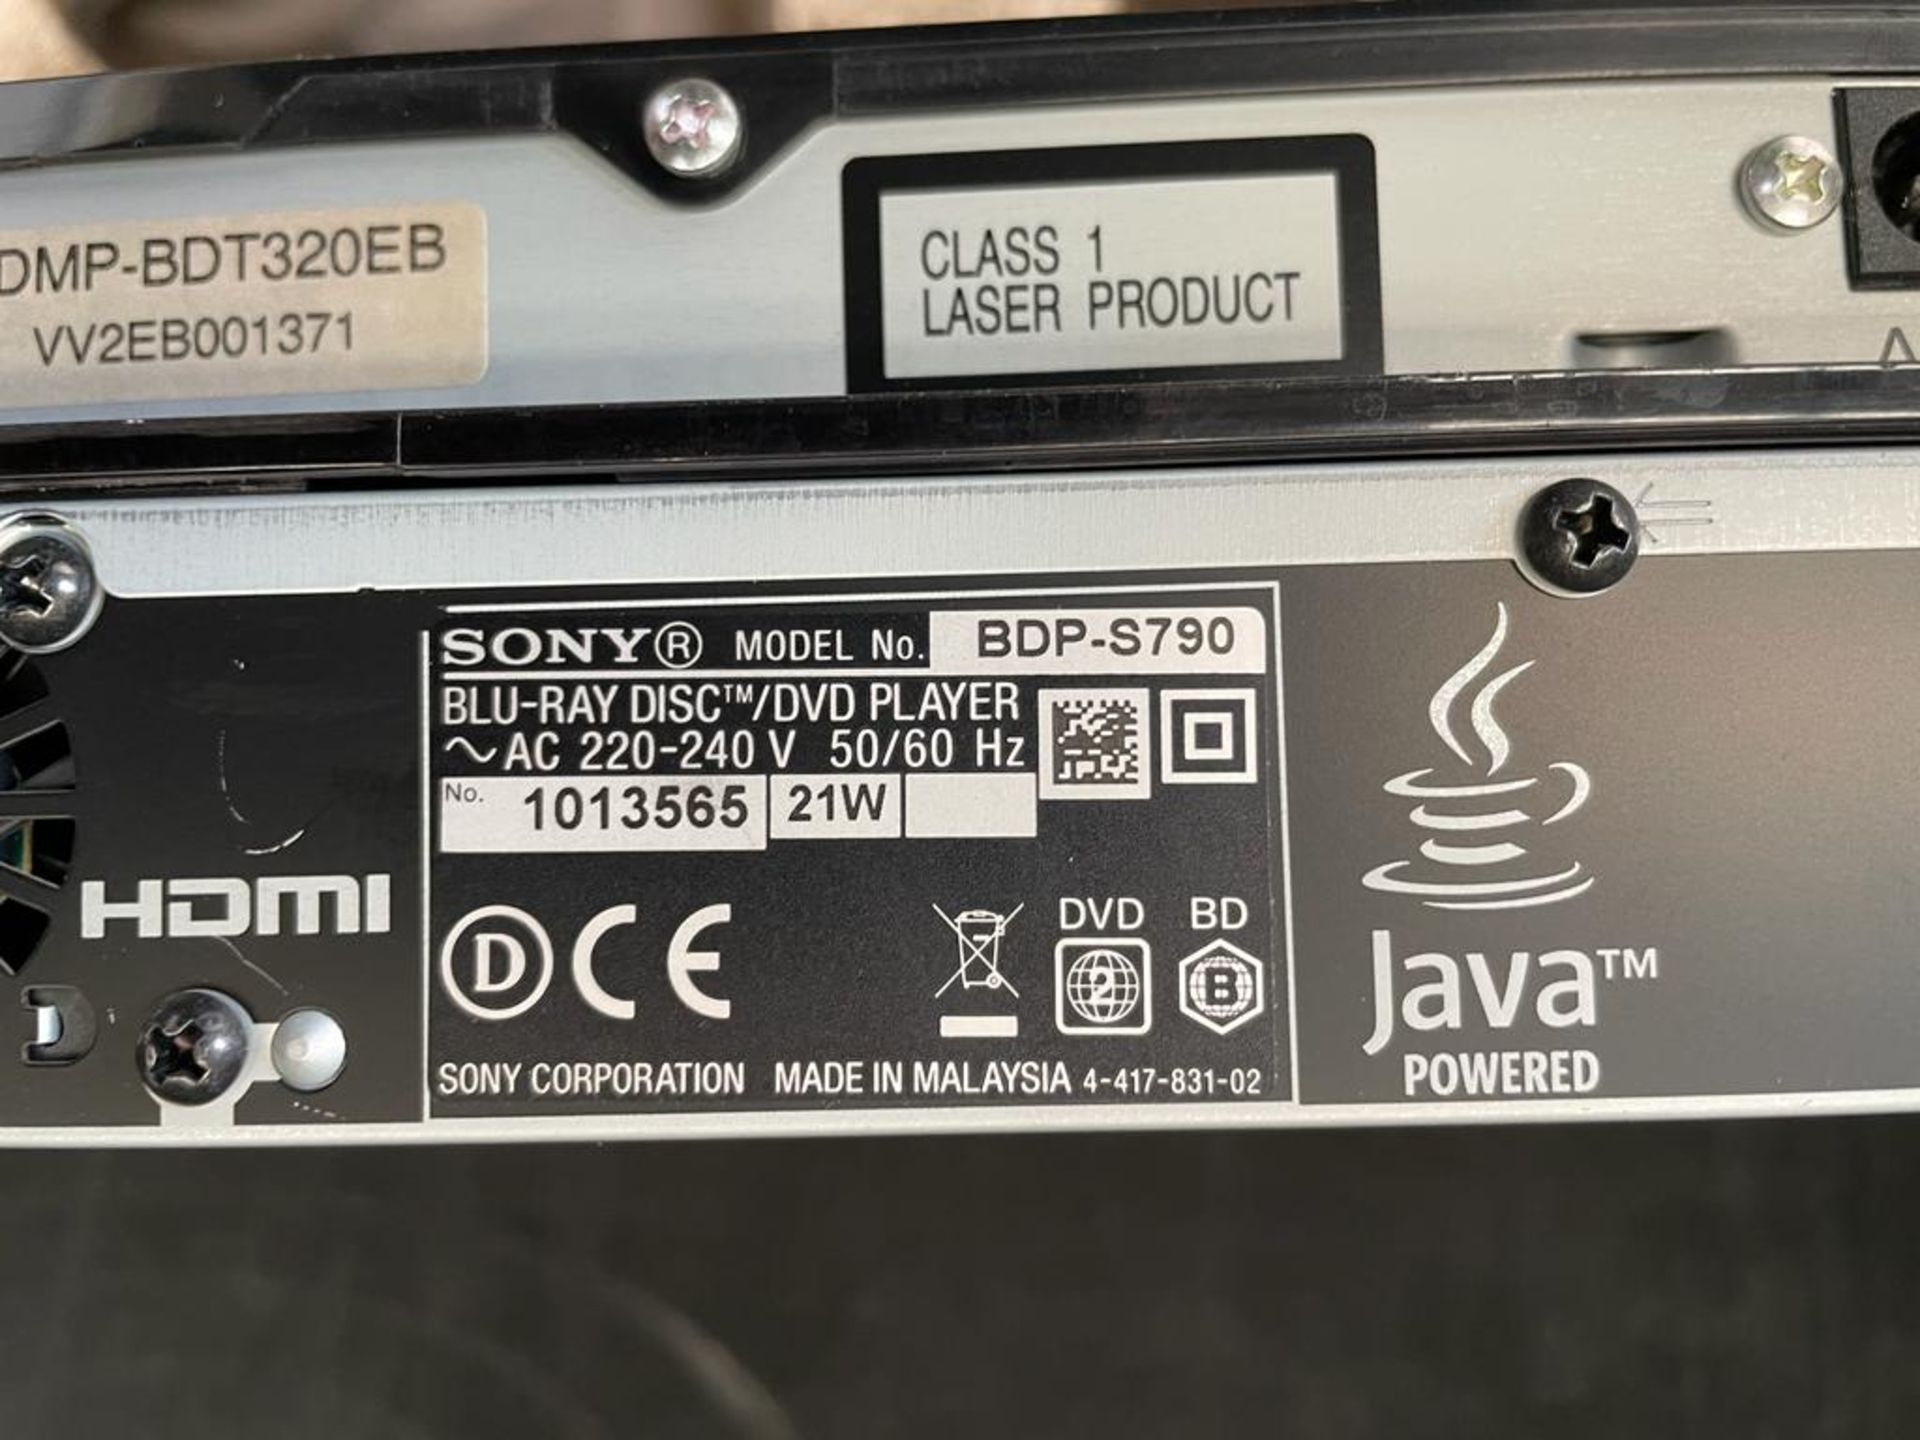 Sony BDP-S790 “Smart Wi-Fi” Blu Ray Disc/DVD Player, Serial Number 1013565 (Location: High - Image 2 of 2